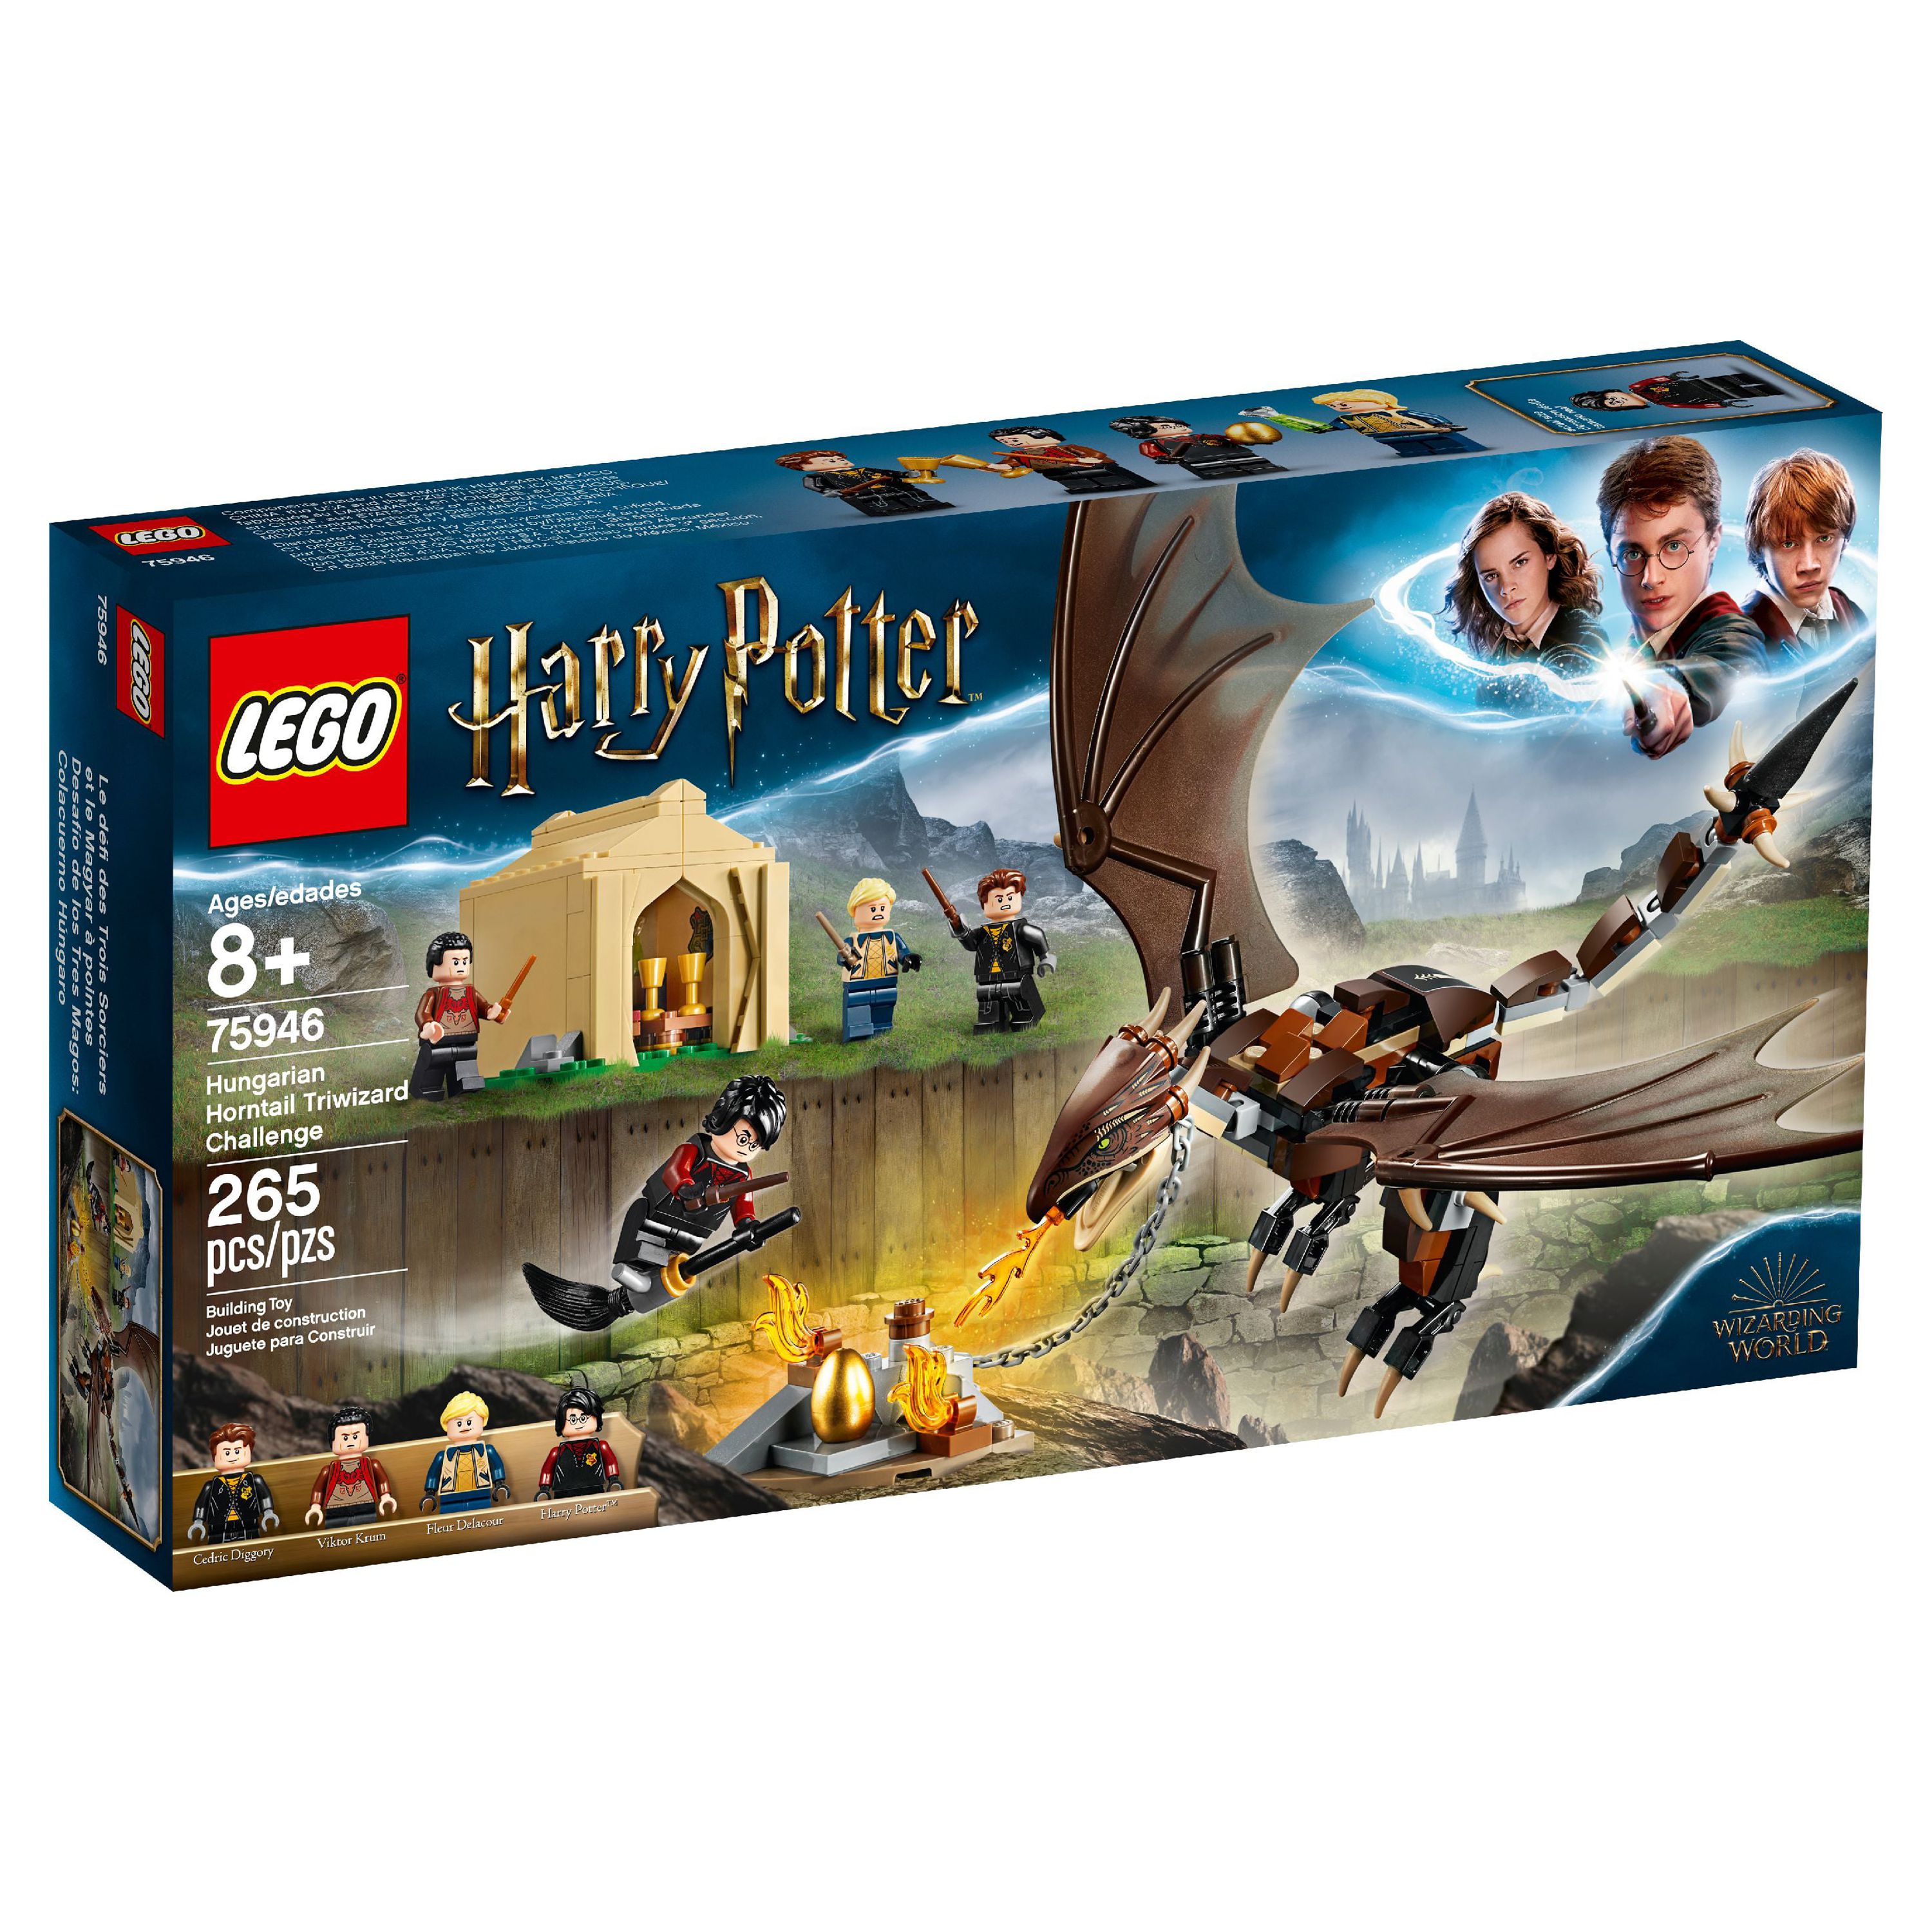 LEGO Harry Potter Hungarian Horntail Triwizard Challenge 75946 (265 Pieces) - image 5 of 8